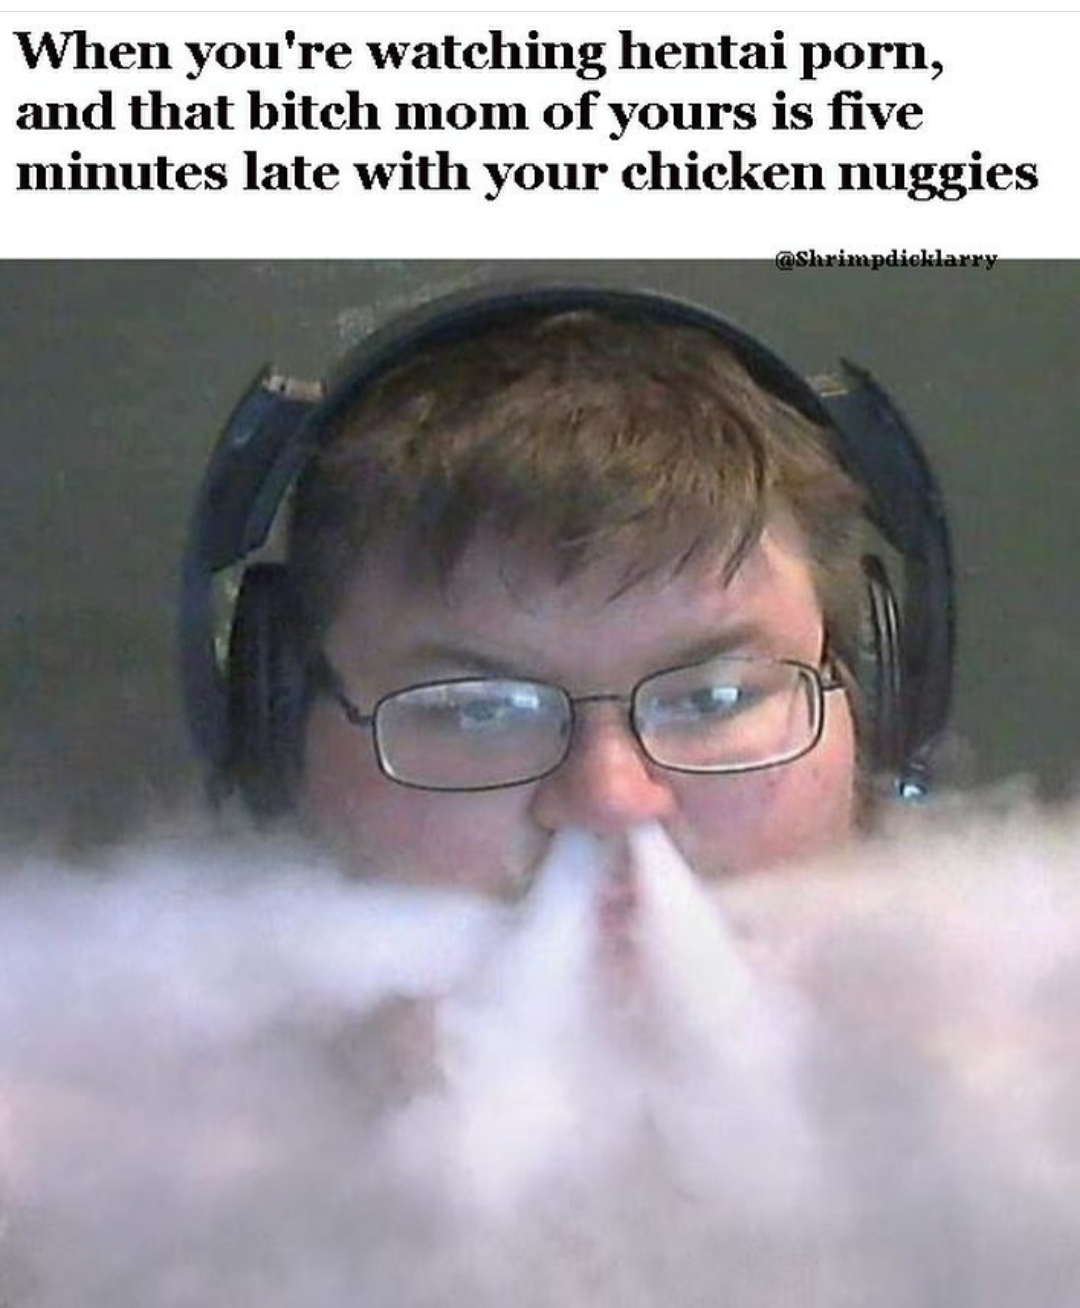 come from a world you don t understand - When you're watching hentai porn, and that bitch mom of yours is five minutes late with your chicken nuggies